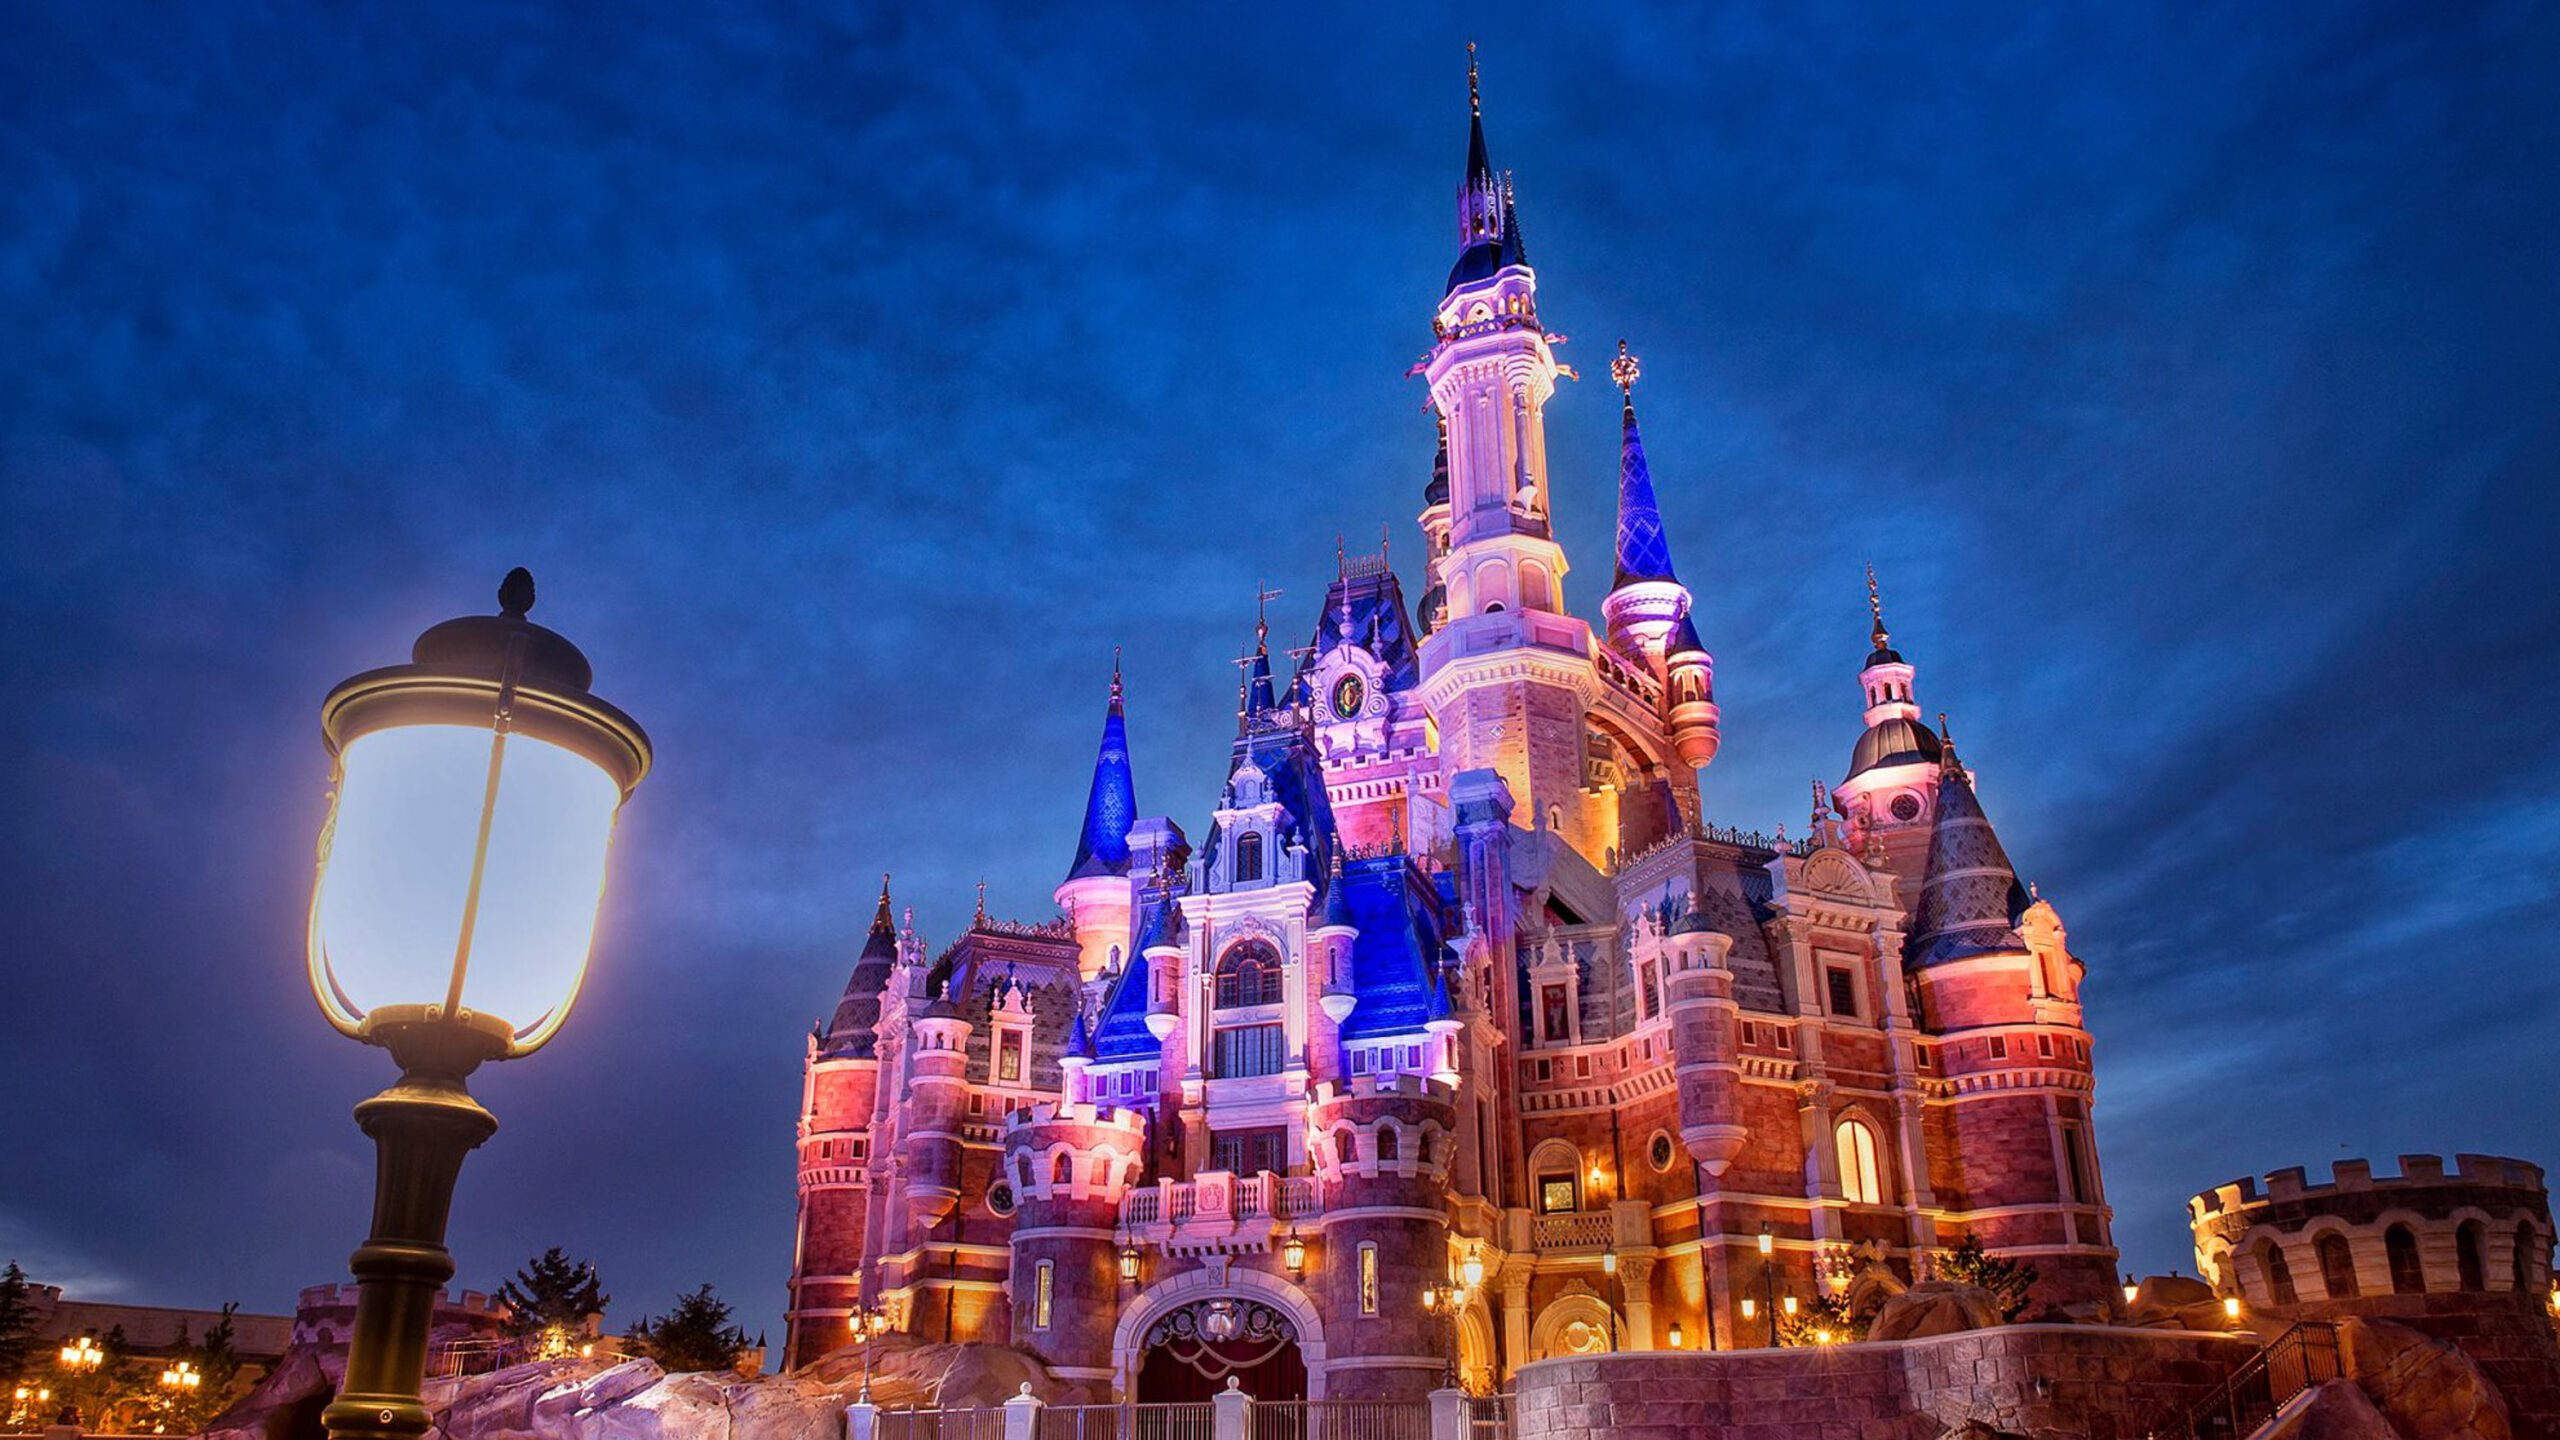 IN PHOTOS: 5 things to know about new Shanghai Disneyland